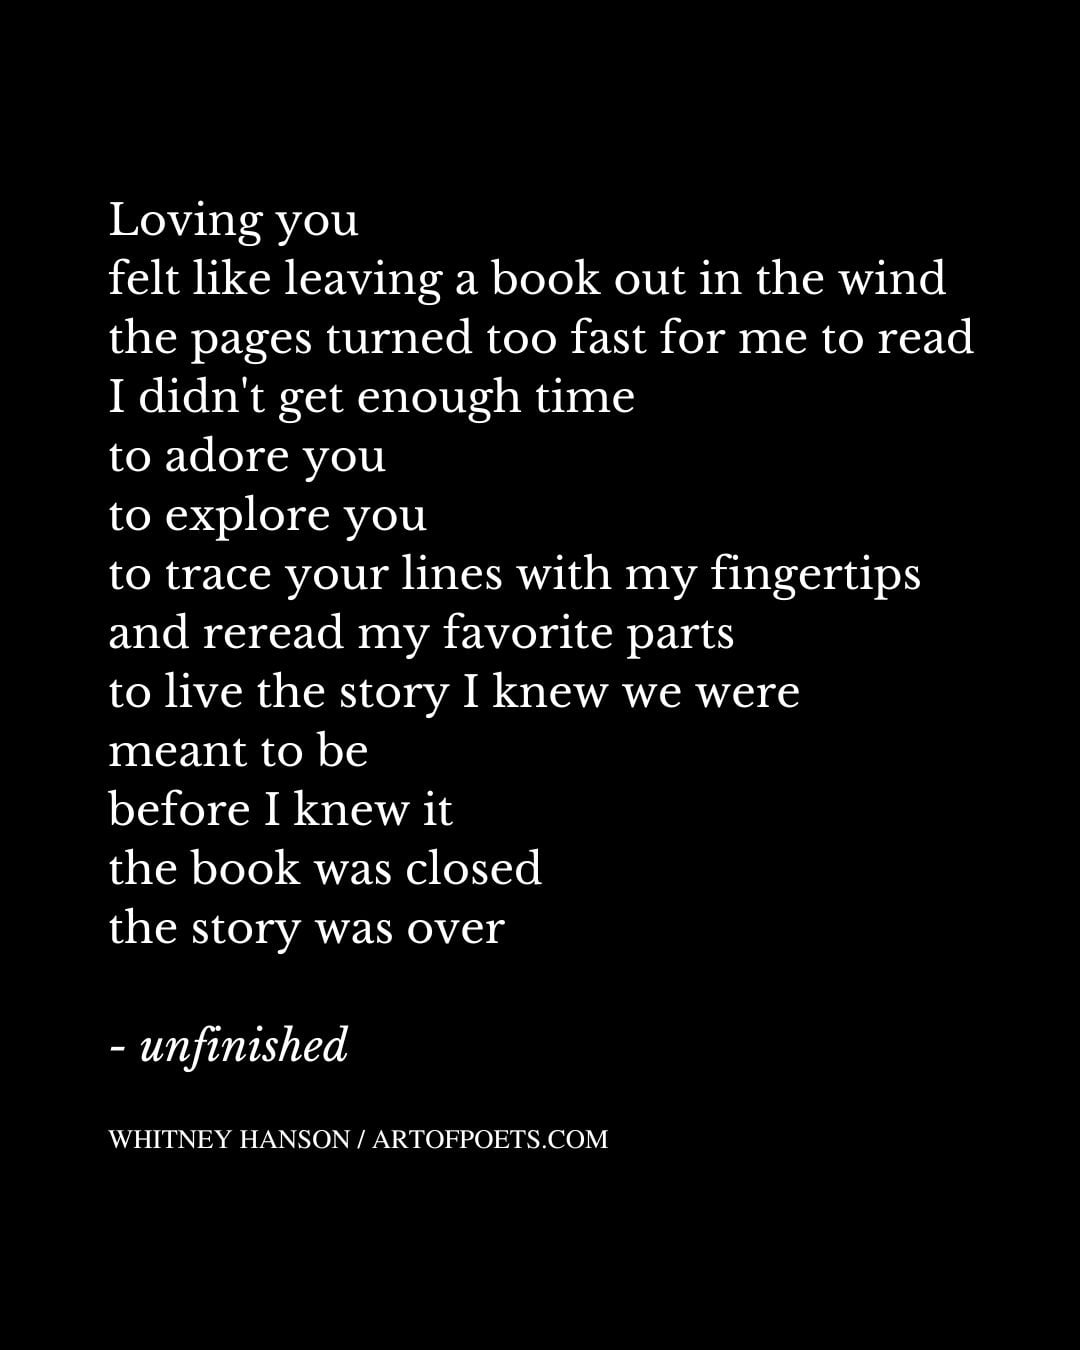 Loving you felt like leaving a book out in the wind the pages turned too fast for me to read I didnt get enough time to adore you